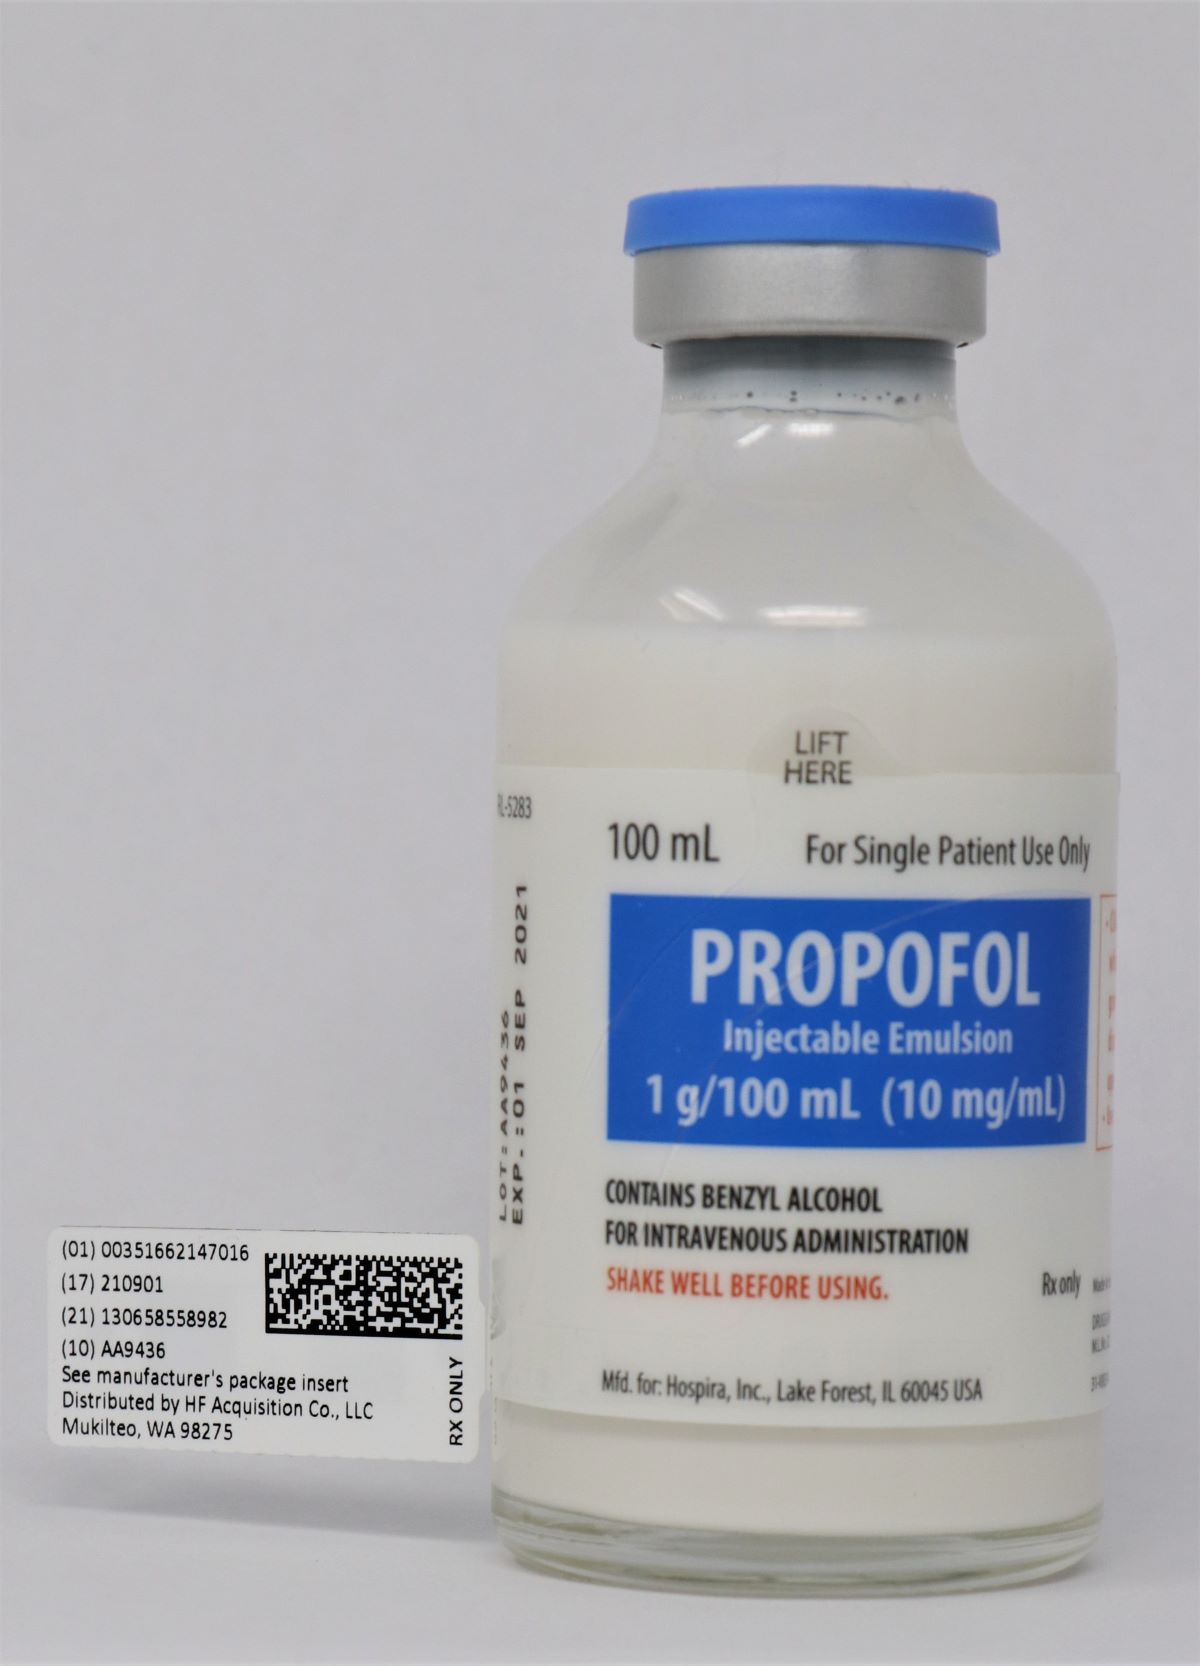 SERIALIZED VIAL LABELING